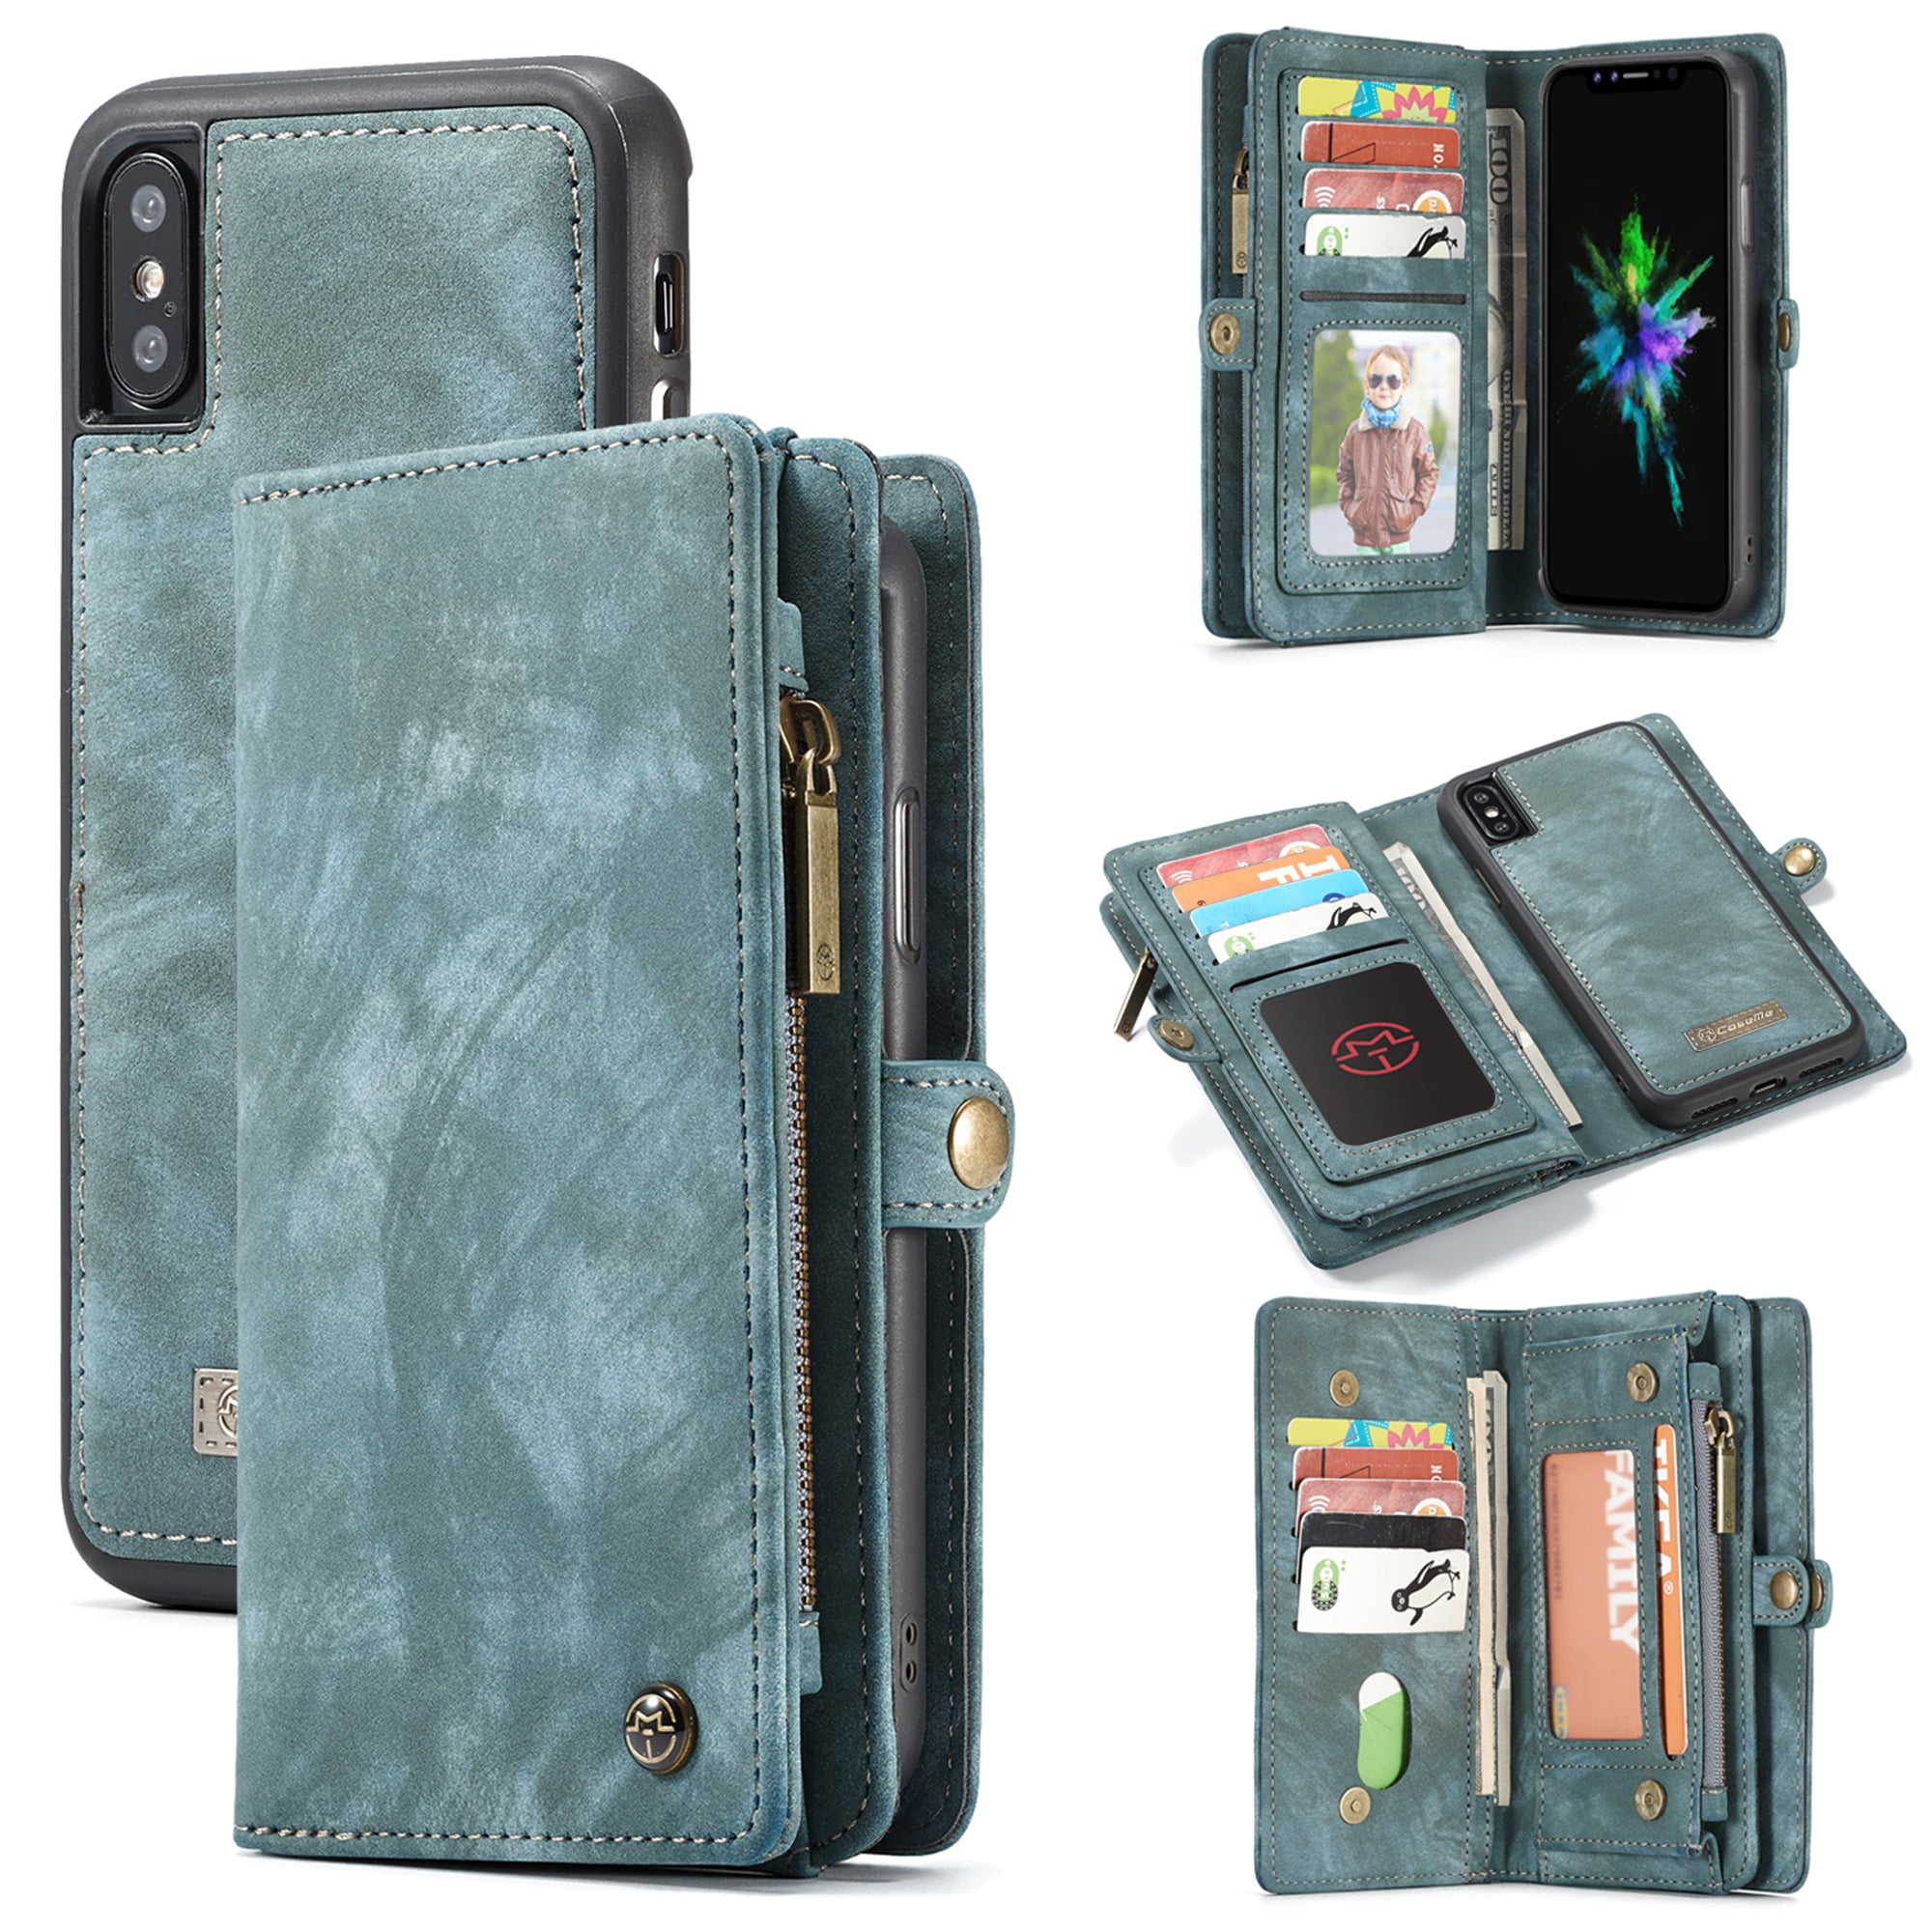 Cover for Leather Card Holders Extra-Protective Business Kickstand Cell Phone case Flip Cover iPhone Xs Flip Case